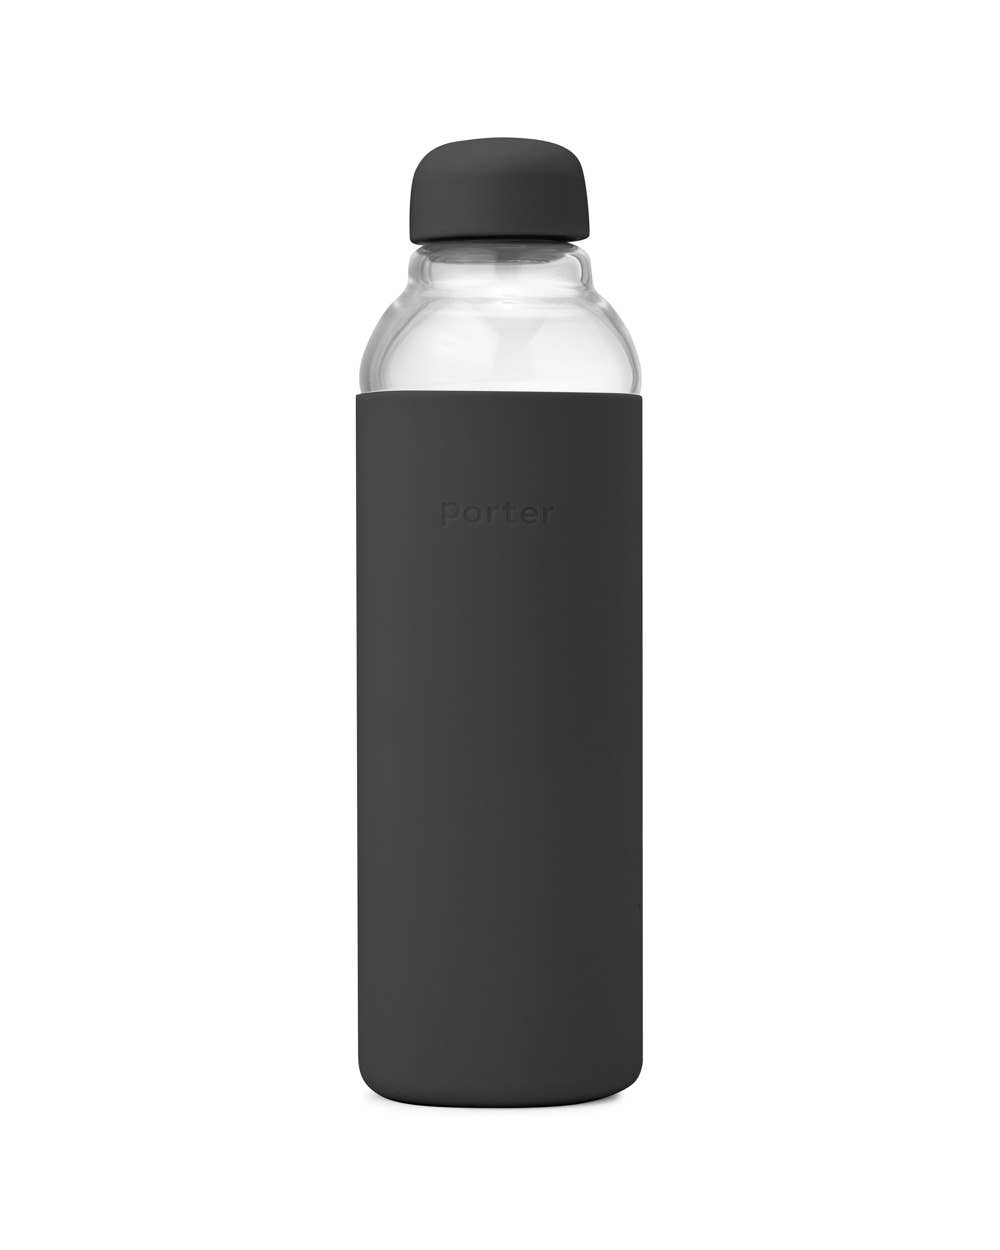 Porter Reusable Glass Water Bottle w/ Silicone Wrap